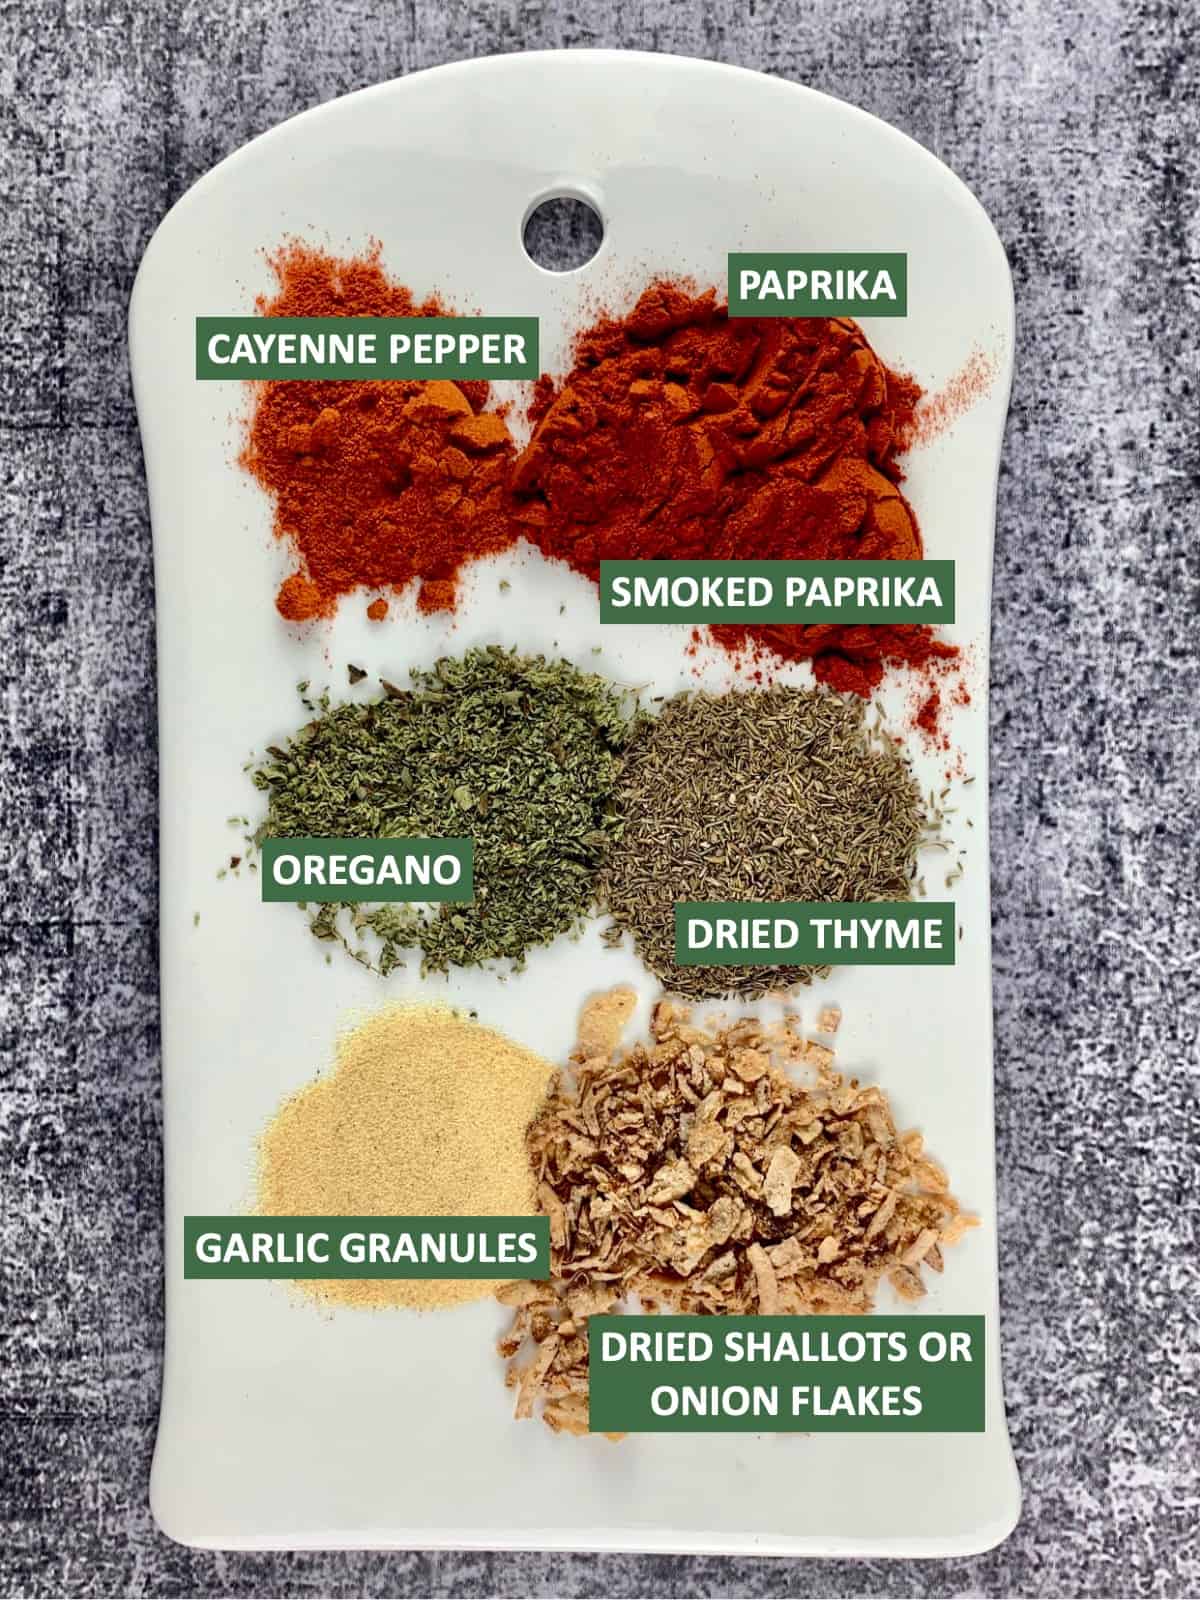 Labelled ingredients needed to make Cajun dry rub on a white board.